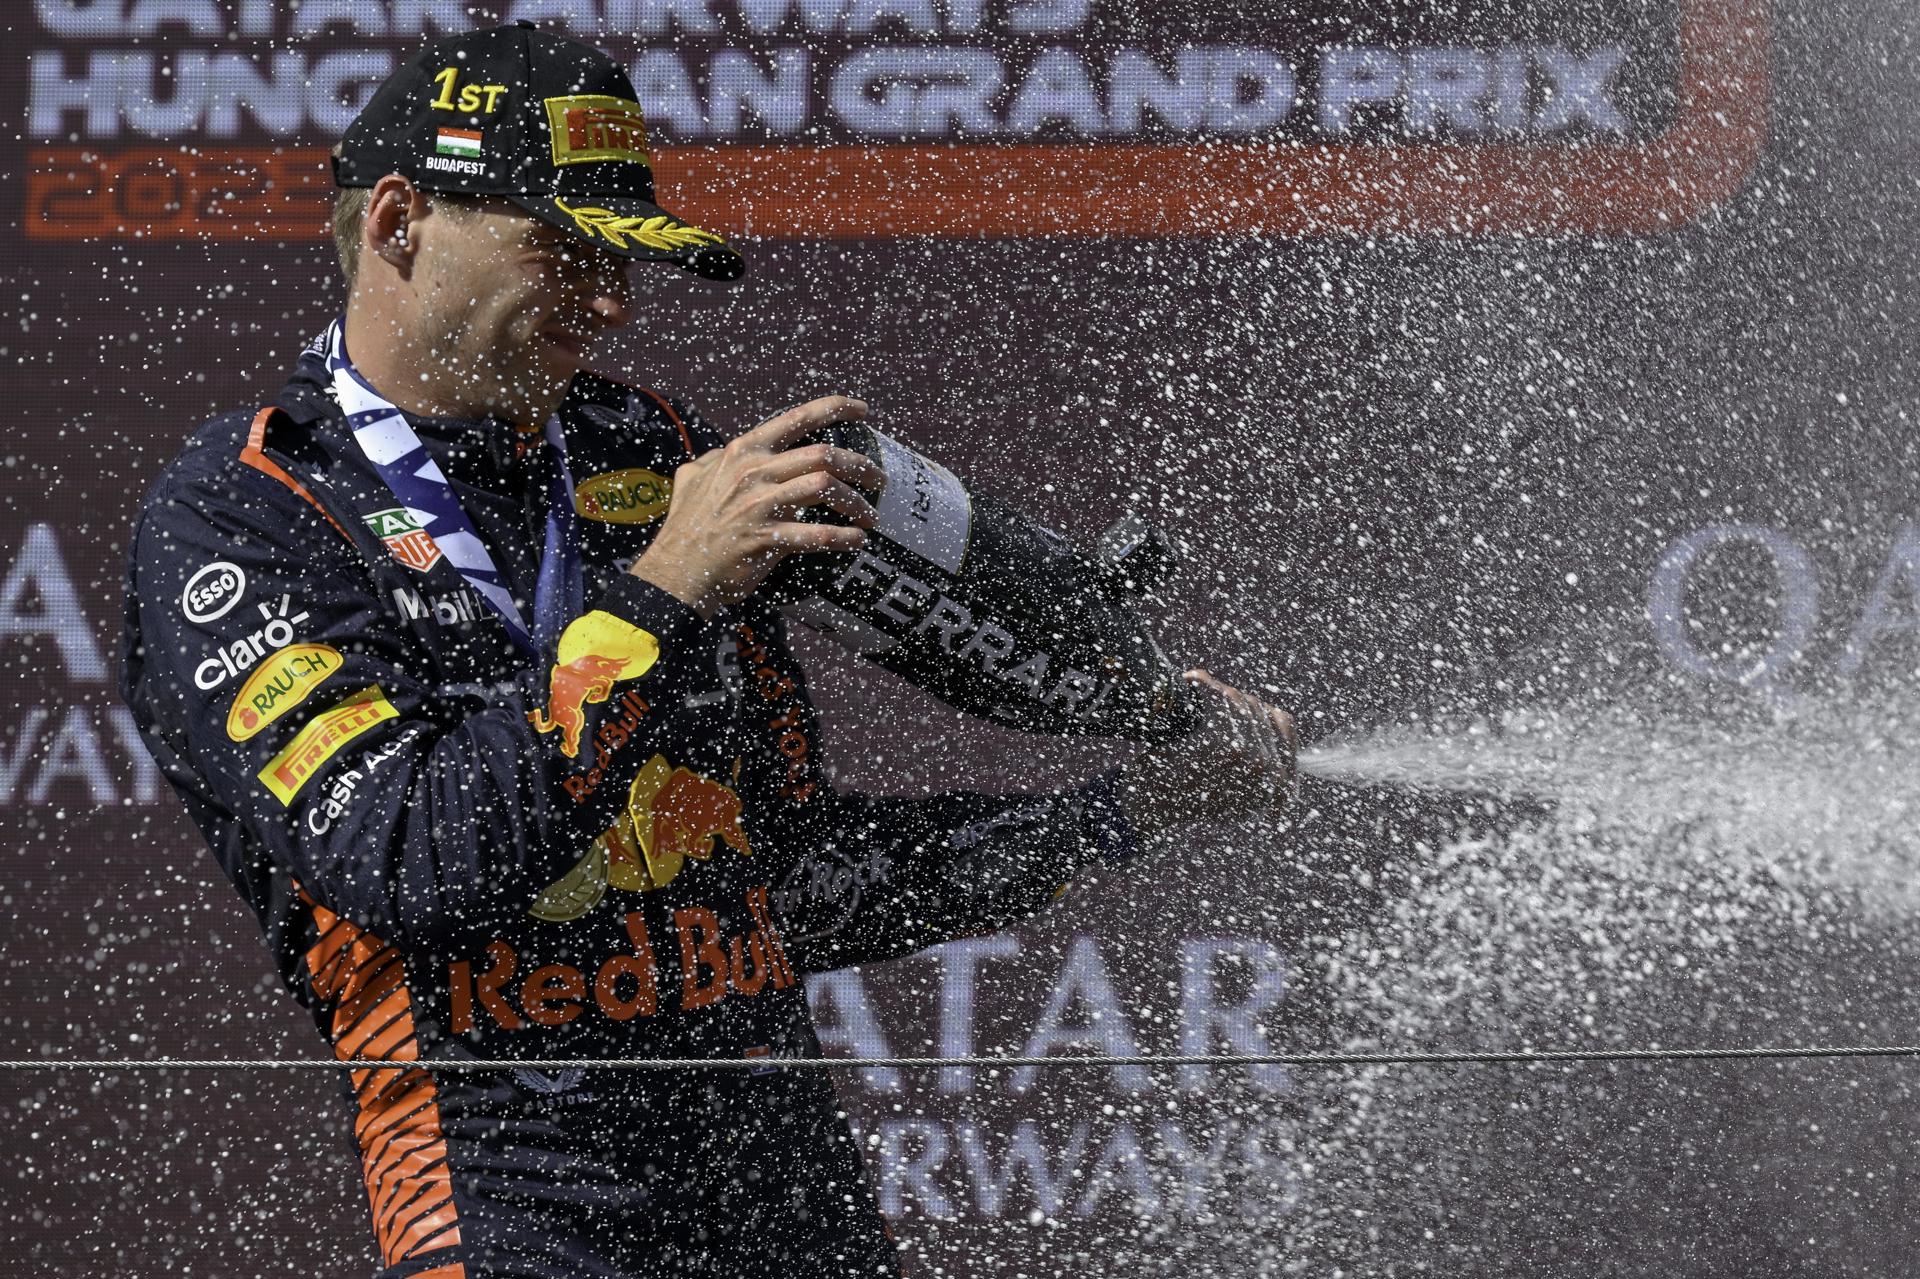 Race winner Max Verstappen (Red Bull) celebrates on the podium after the Formula One Hungarian Grand Prix at the Hungaroring circuit in Mogyorod, Hungary, on 23 July 2023.  EFE/EPA/Zsolt Czegledi HUNGARY OUT